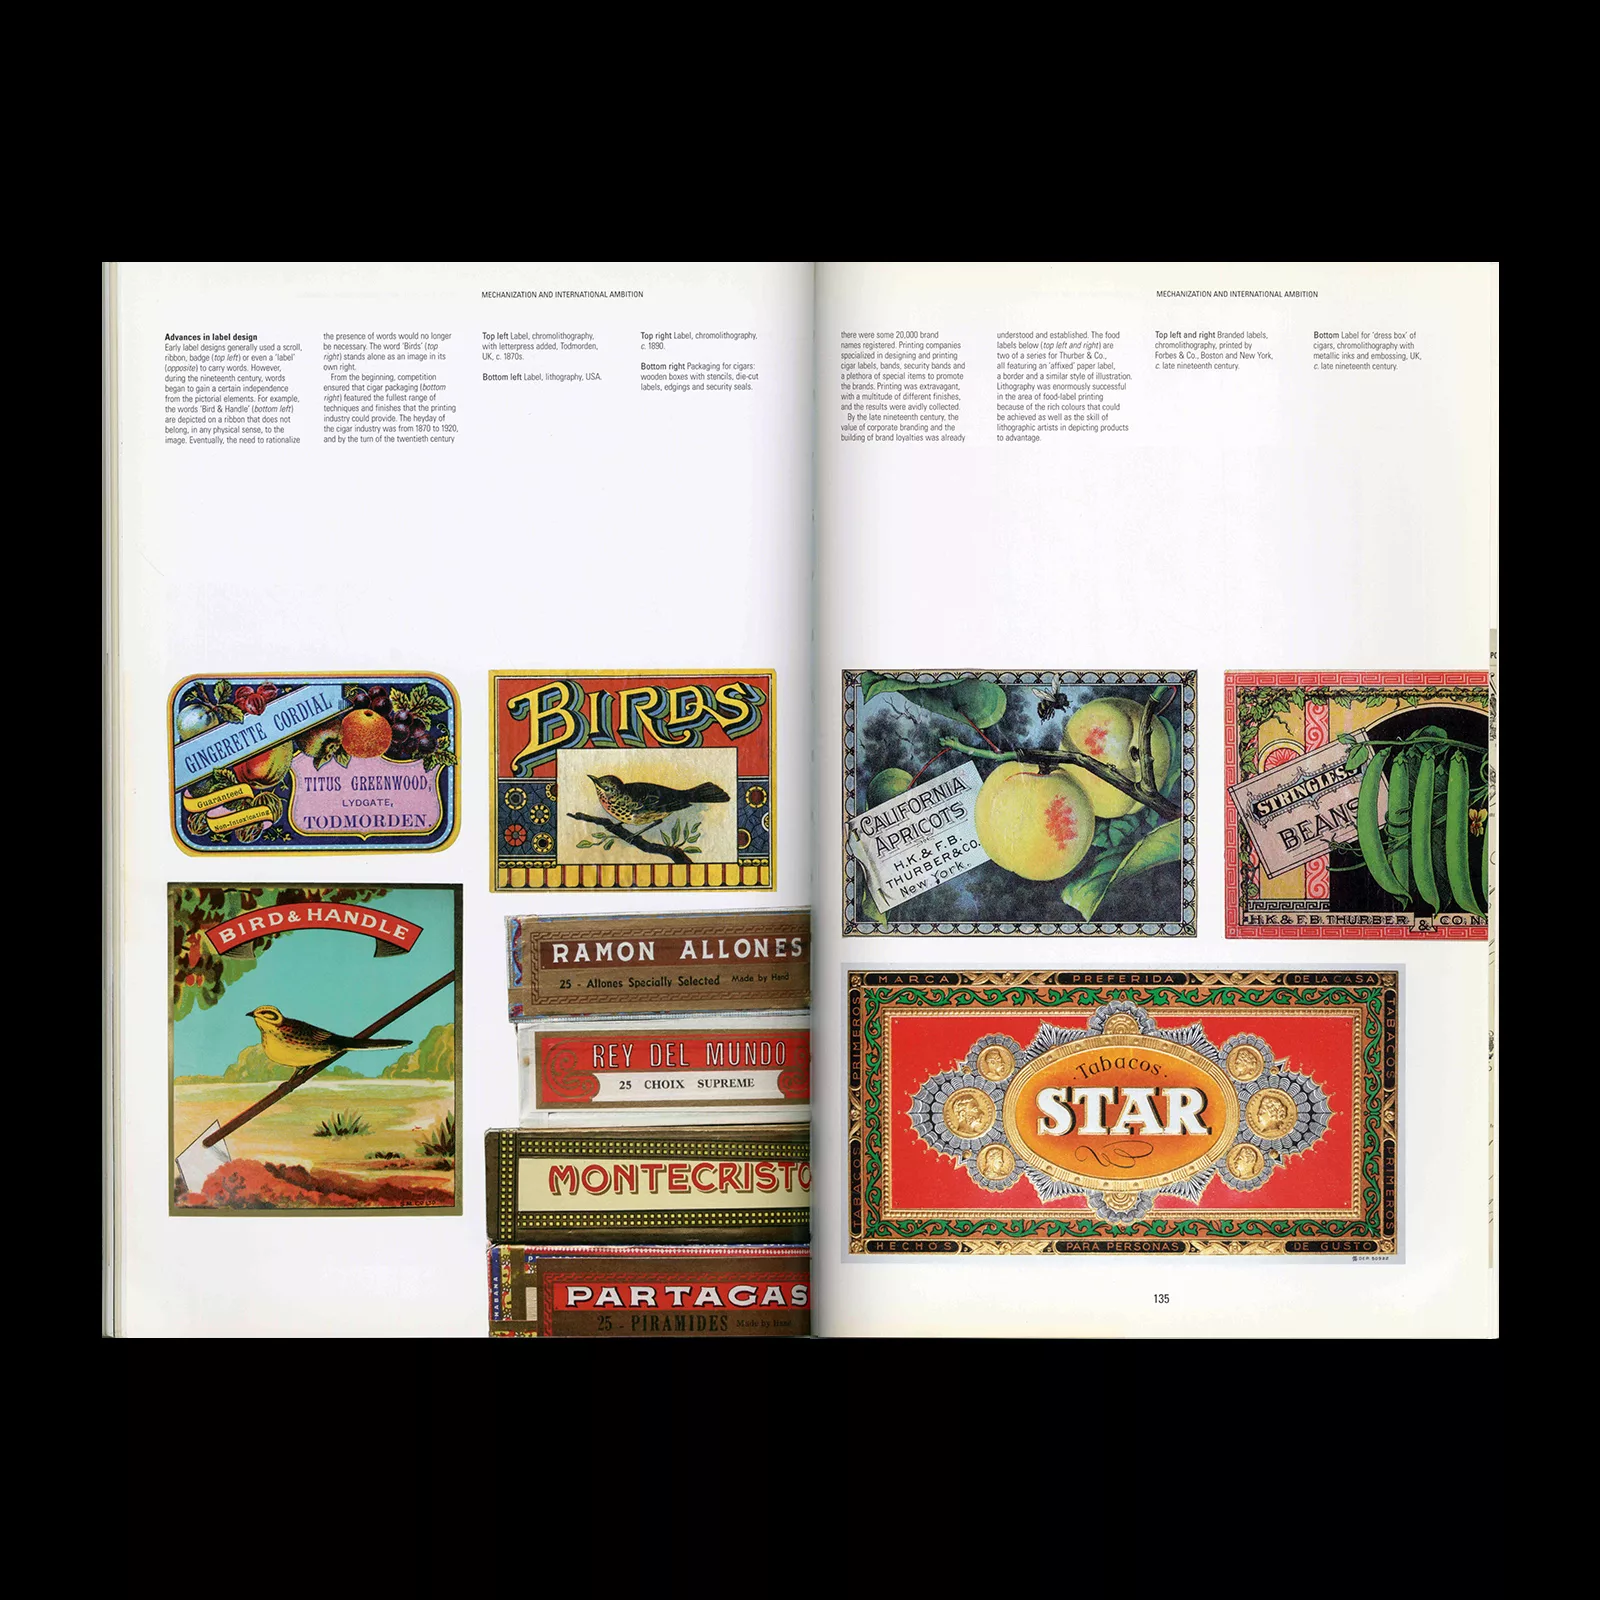 Graphic Design before Graphic Designers - The Printer as Designer and Craftsman 1700 - 1914, Thames & Hudson, 2012